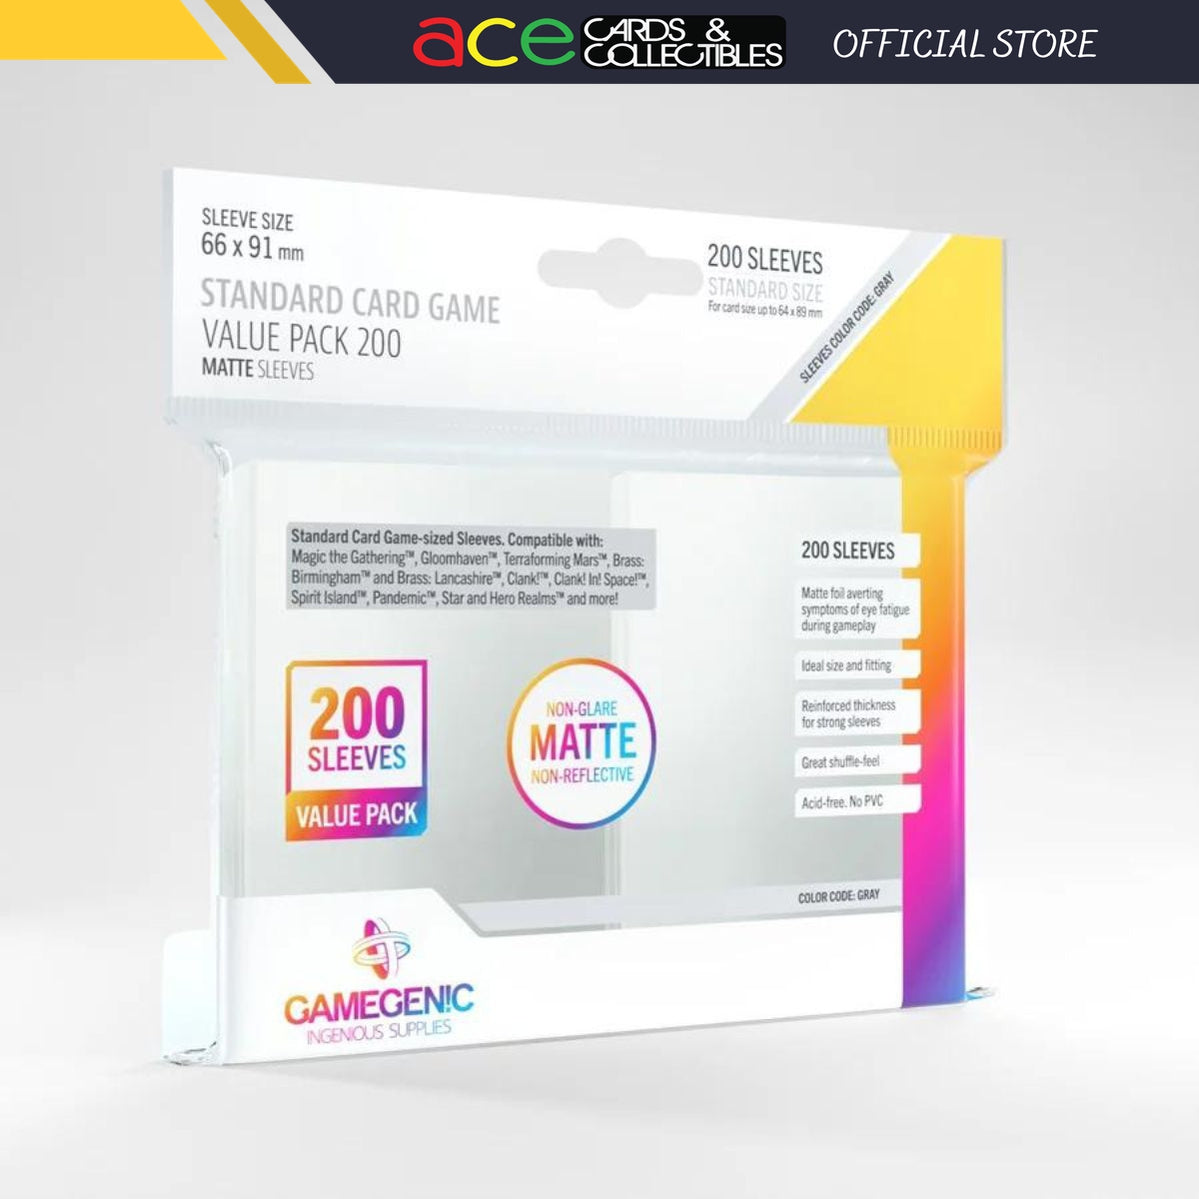 Gamegenic Sleeve Standard Card Game “Value Pack 200 ~ Matte Sleeve”-Gamegenic-Ace Cards & Collectibles